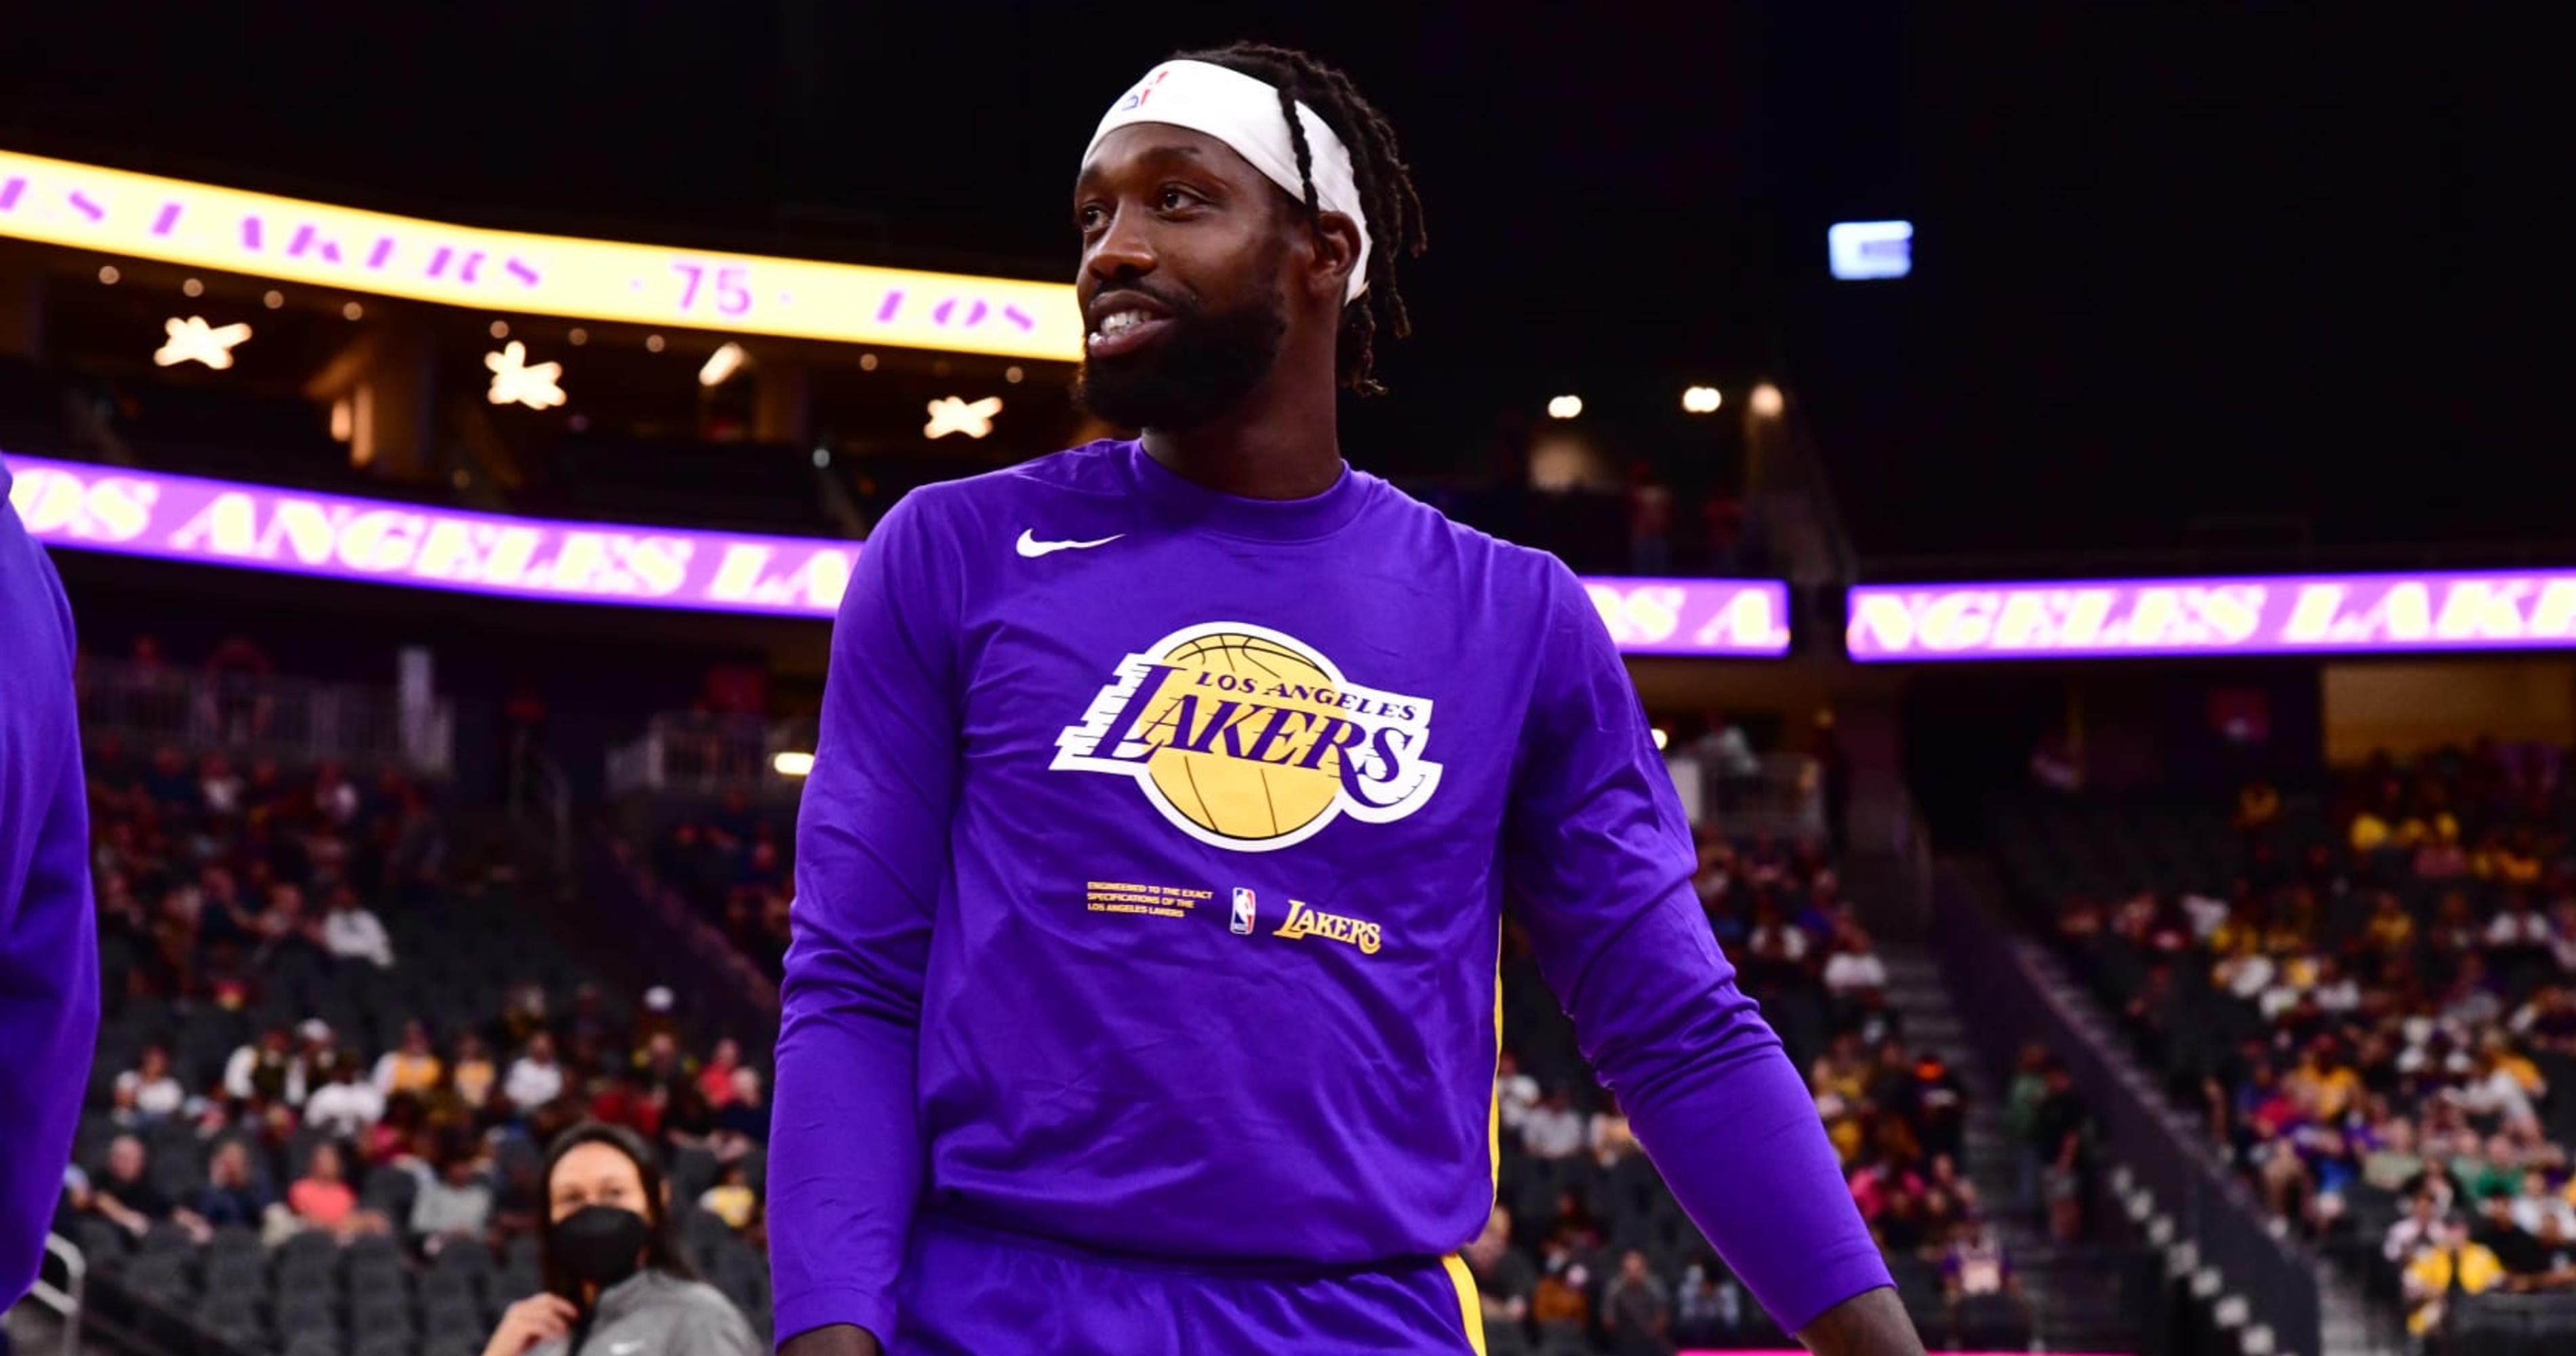 NBA Buzz on X: First look at Patrick Beverley in Lakers gear, rocking  their new “Statement” jerseys! 🔥 Welcome to LA, Pat Bev!   / X